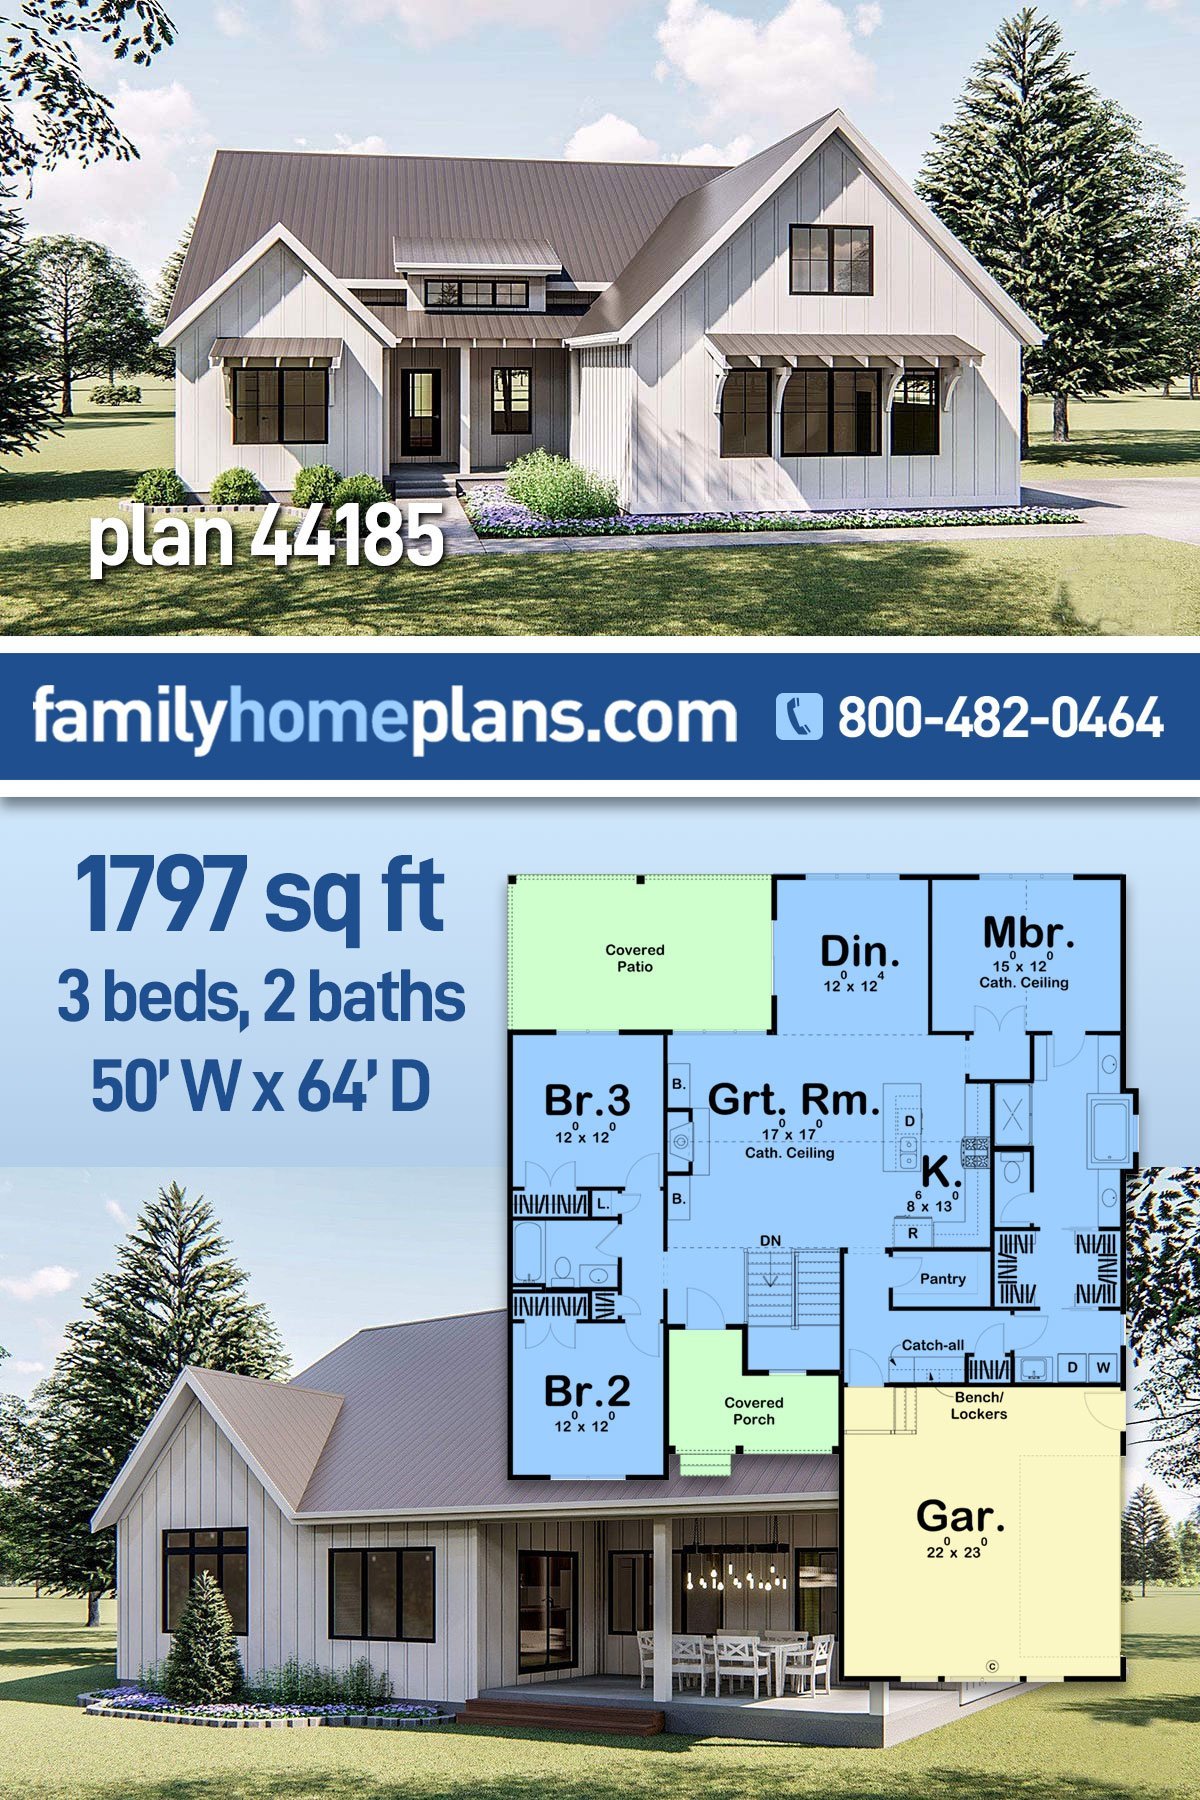 Country, Farmhouse, Southern, Traditional House Plan 44185 with 3 Bed, 2 Bath, 2 Car Garage